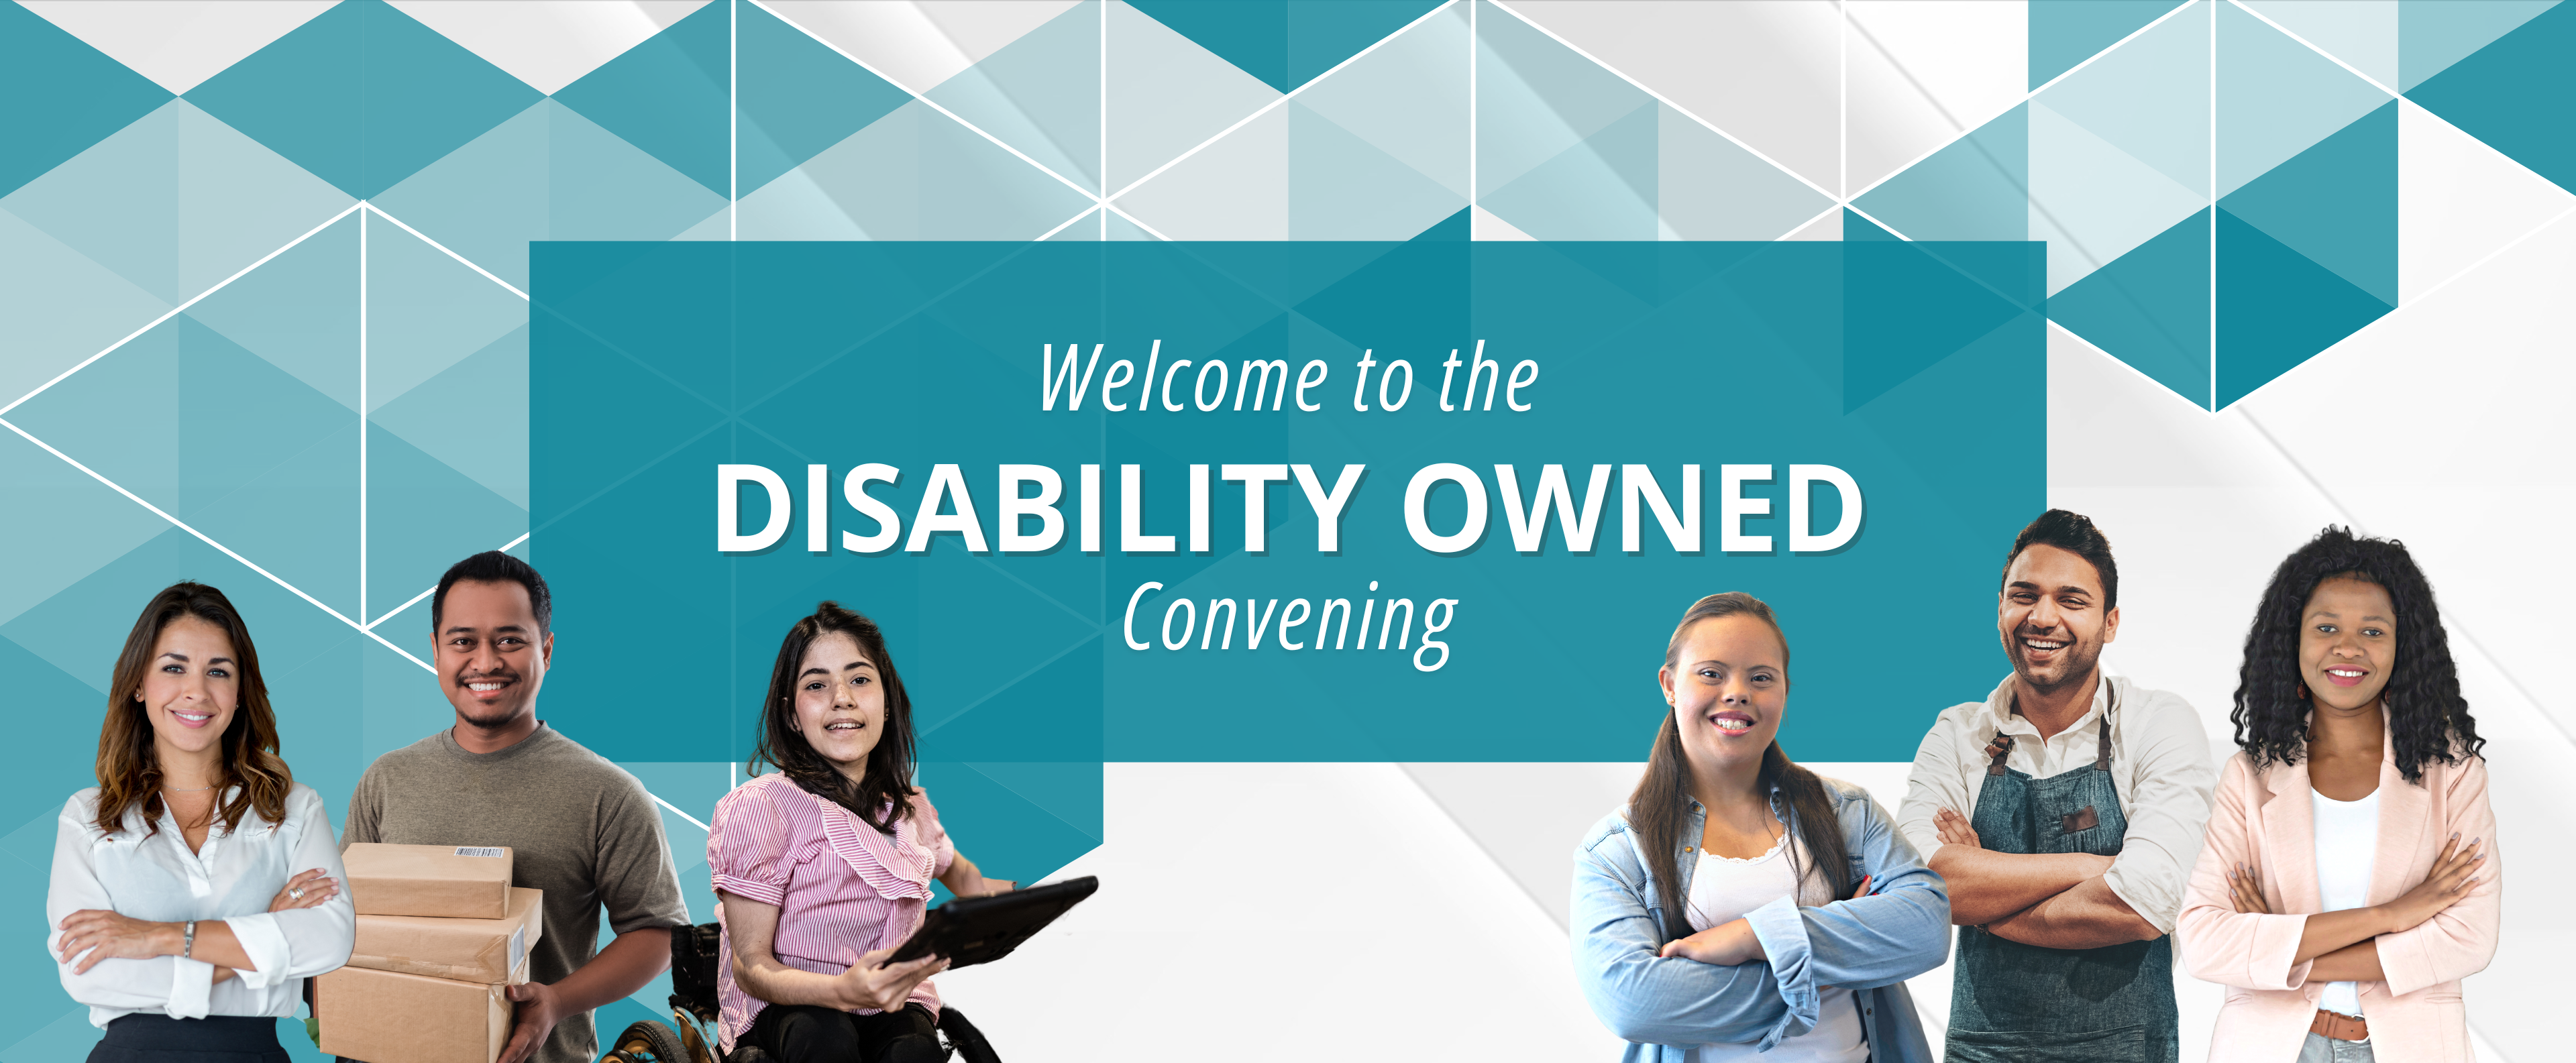 Welcome to the Disability Owned Convening